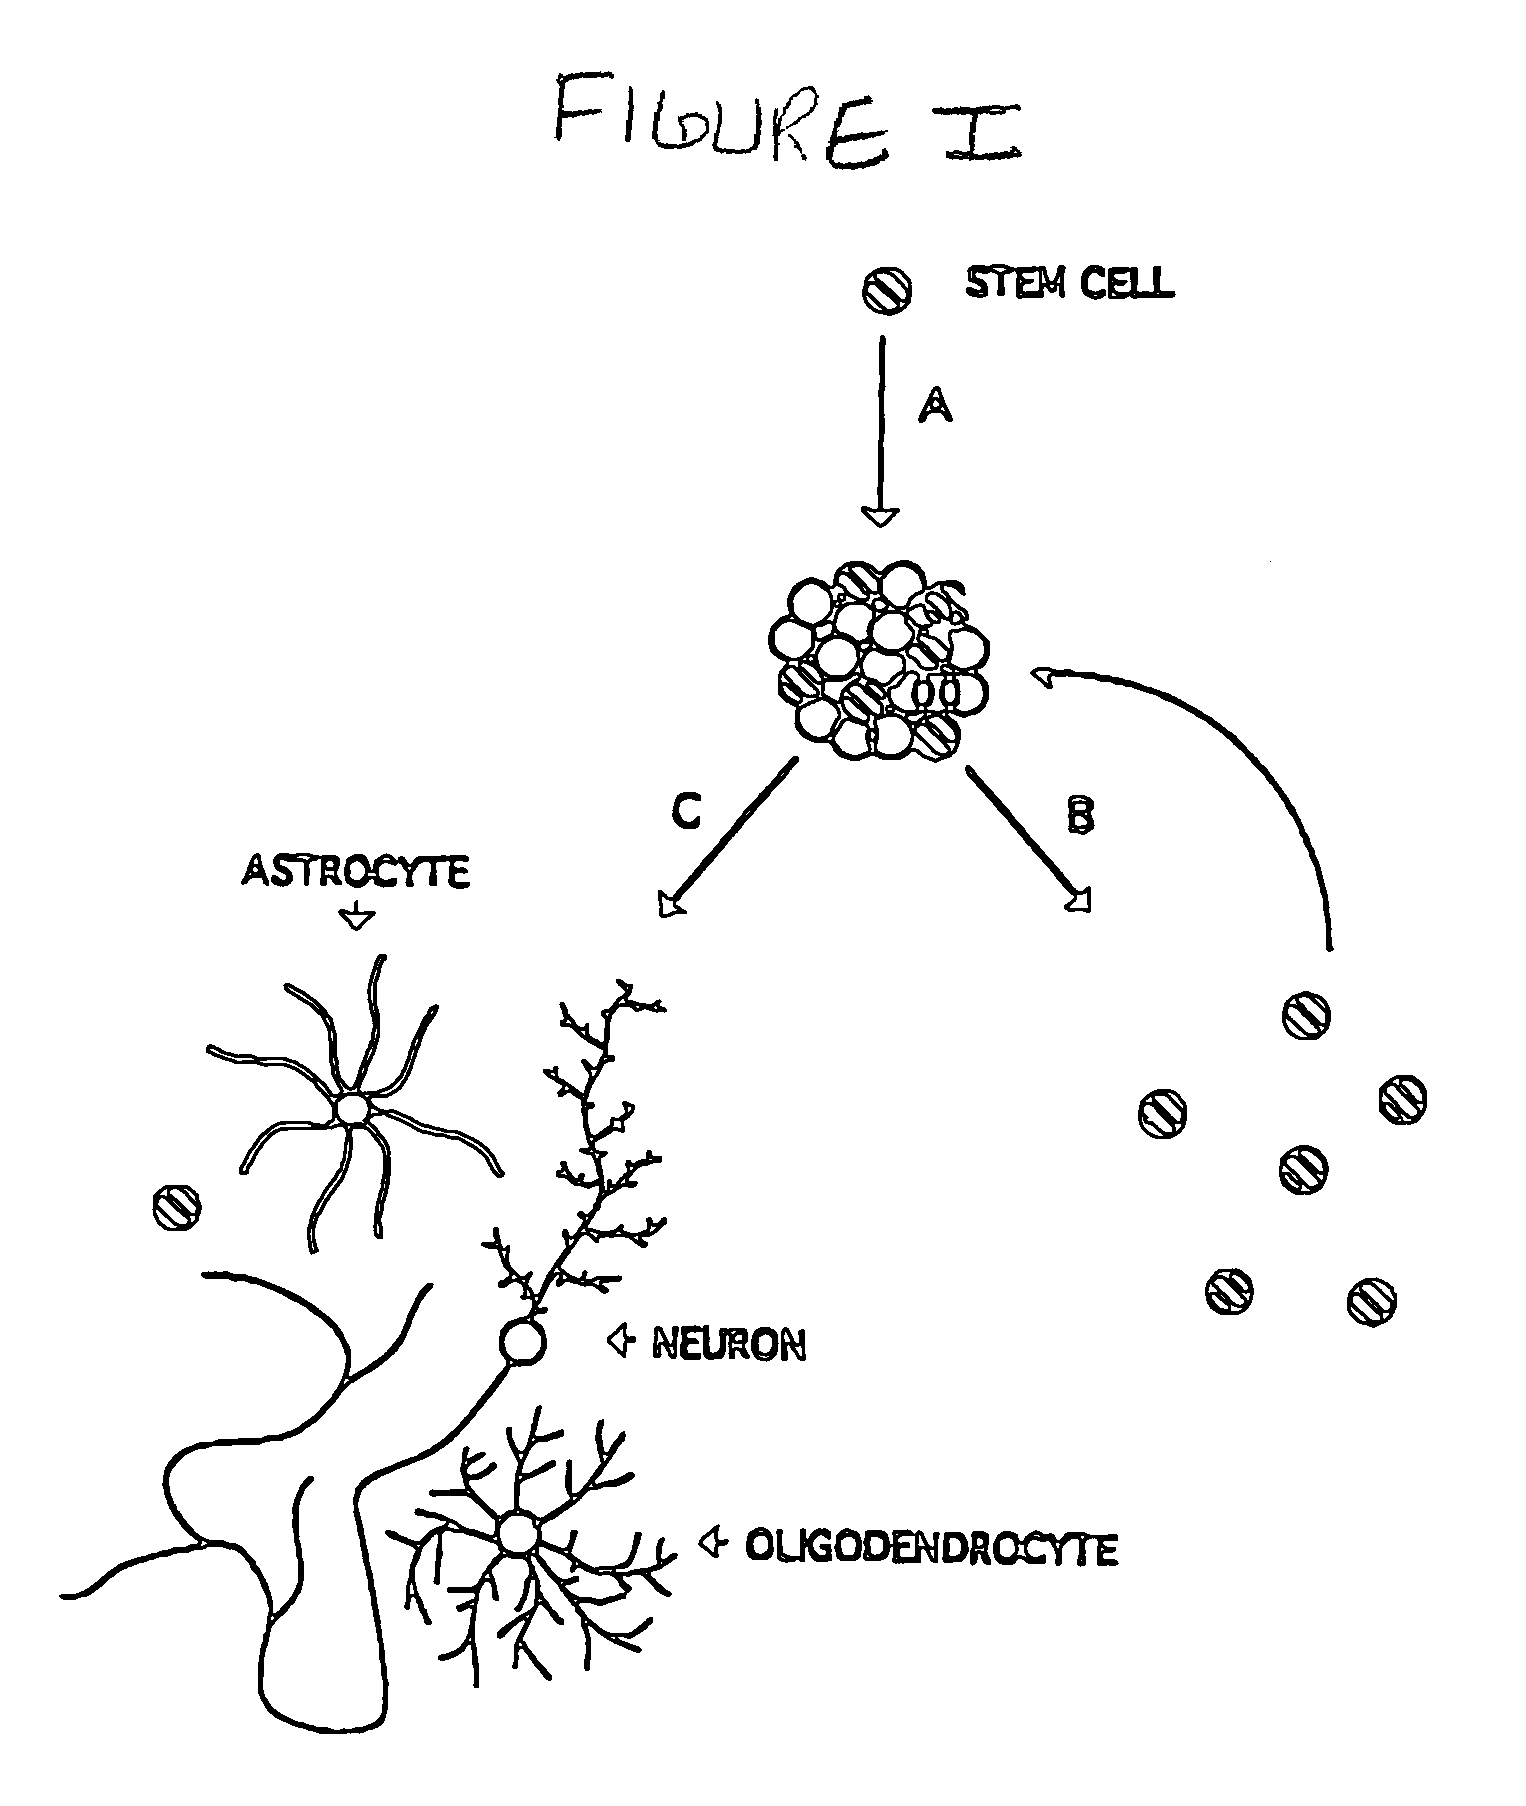 Multipotent neural stem cell compositions